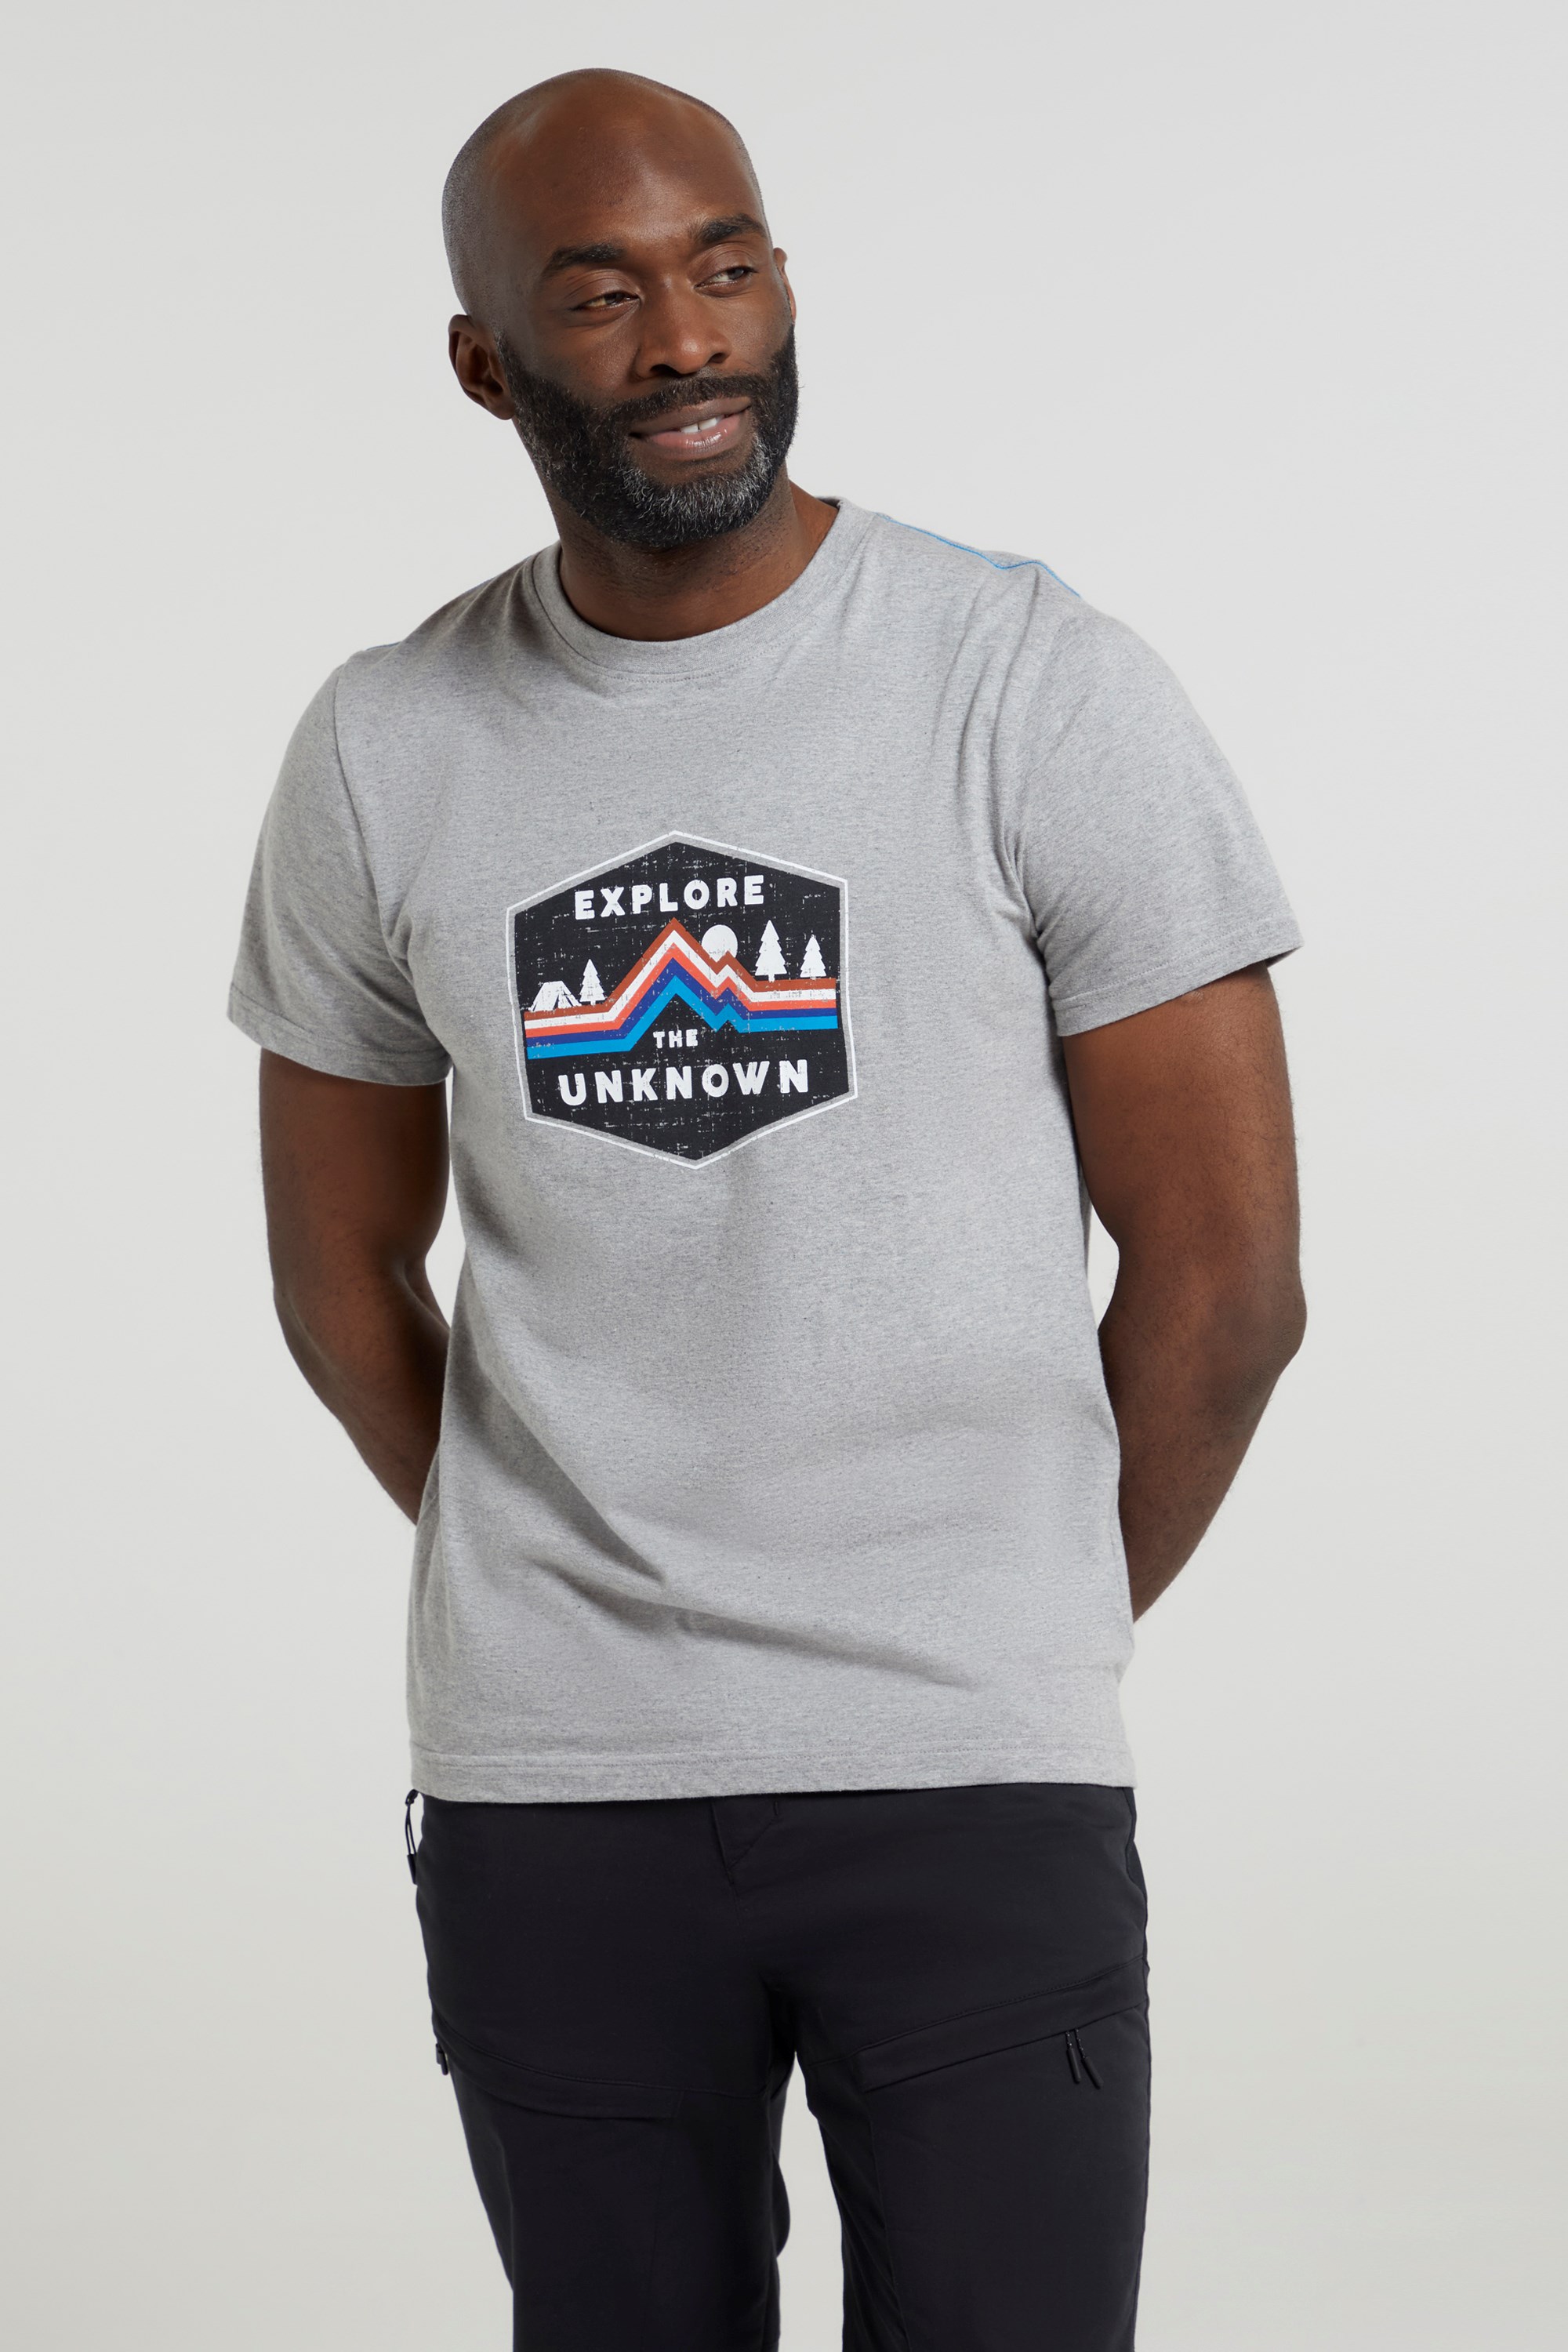 Explore The Unknown Mens Organic Cotton T-Shirt - Grey